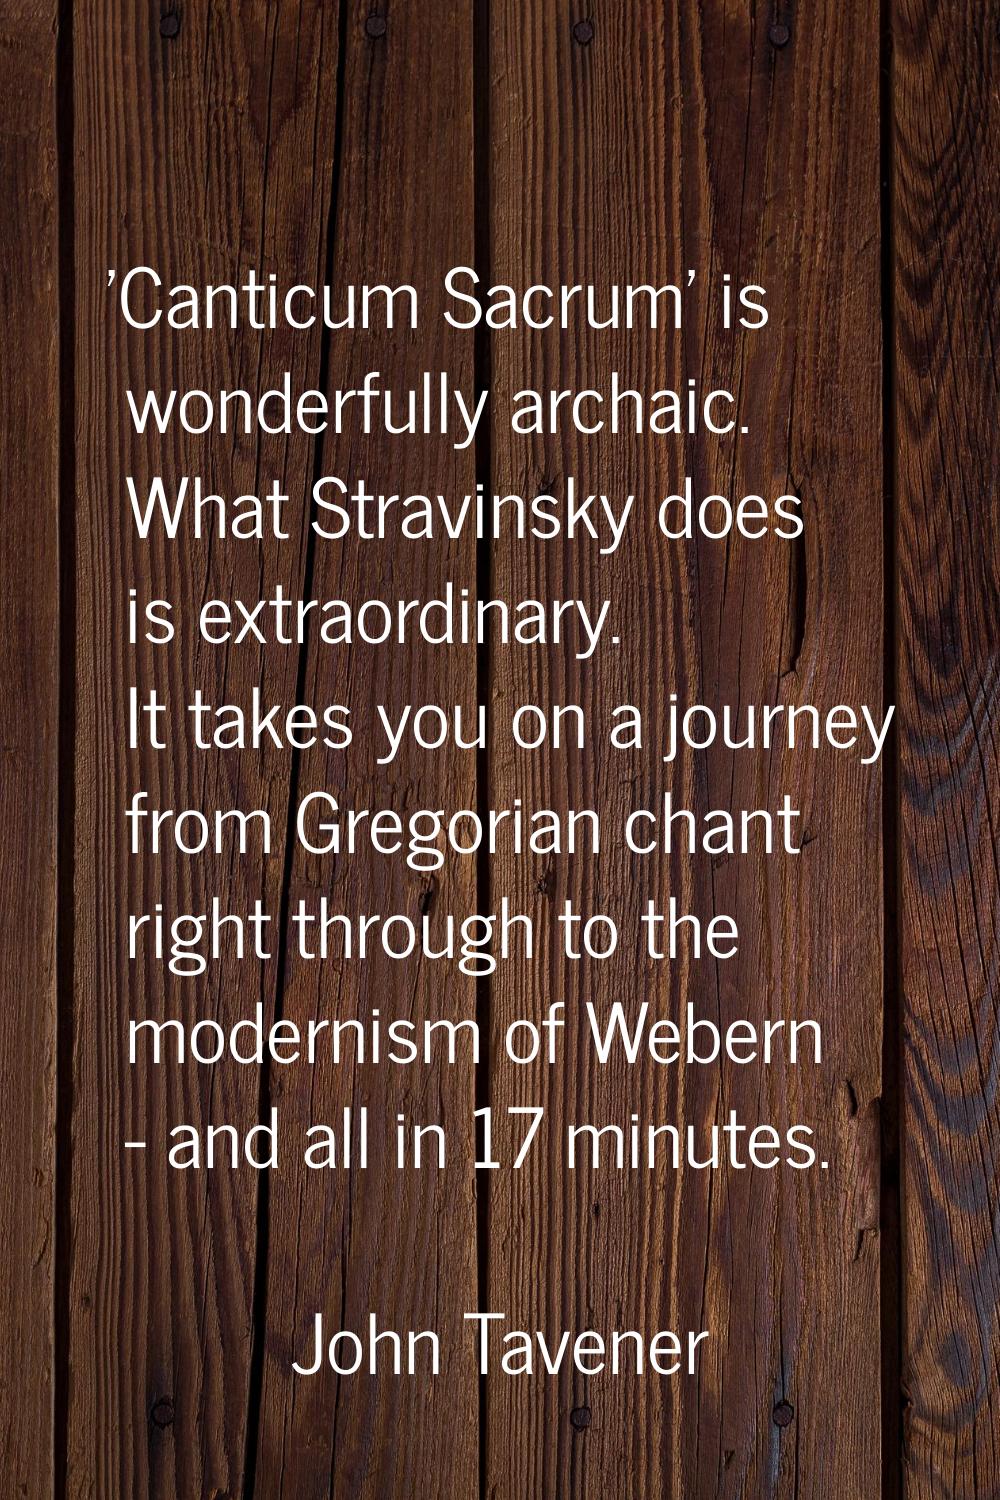 'Canticum Sacrum' is wonderfully archaic. What Stravinsky does is extraordinary. It takes you on a 